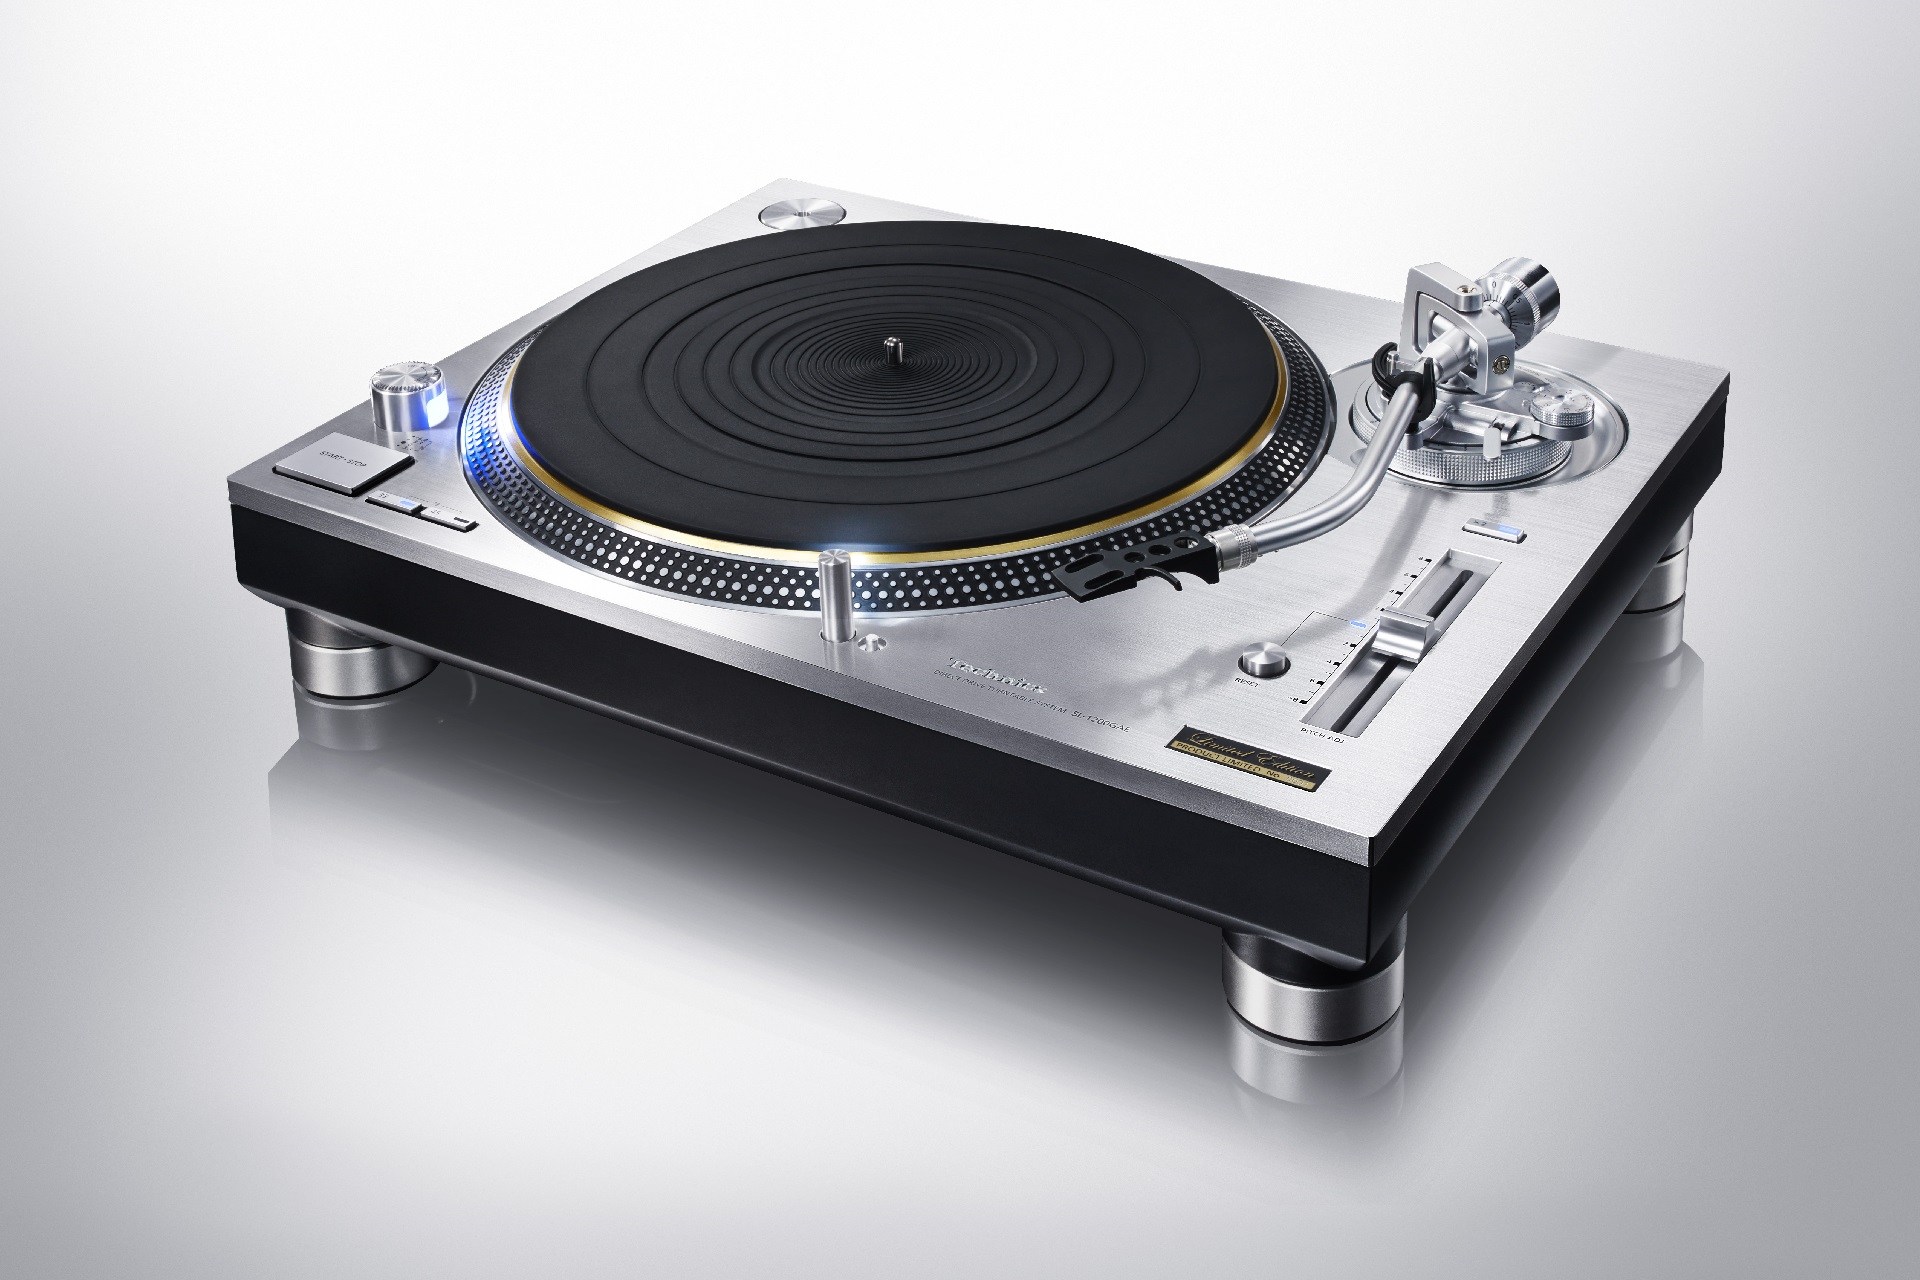 The legendary Technics SL-1200 turntable is back and better than 